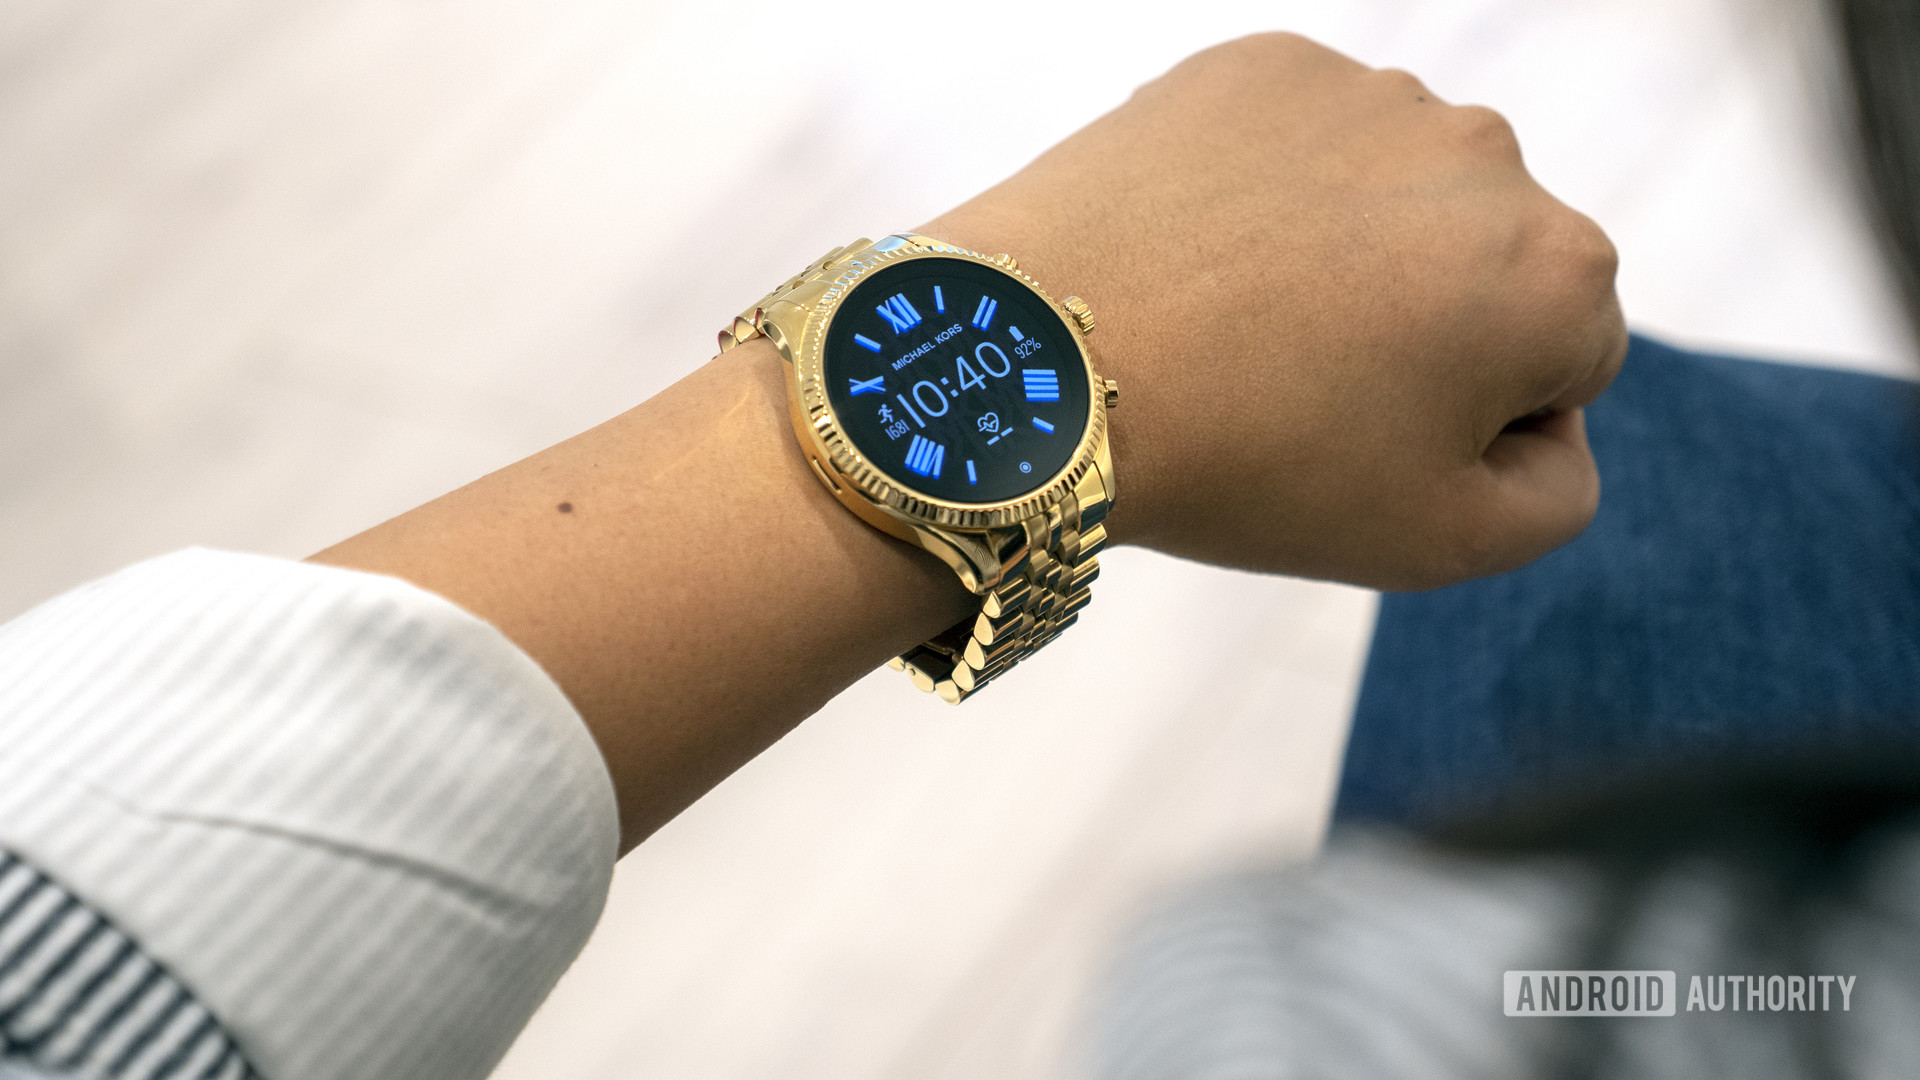 The best Michael Kors smartwatches for men  Android Authority